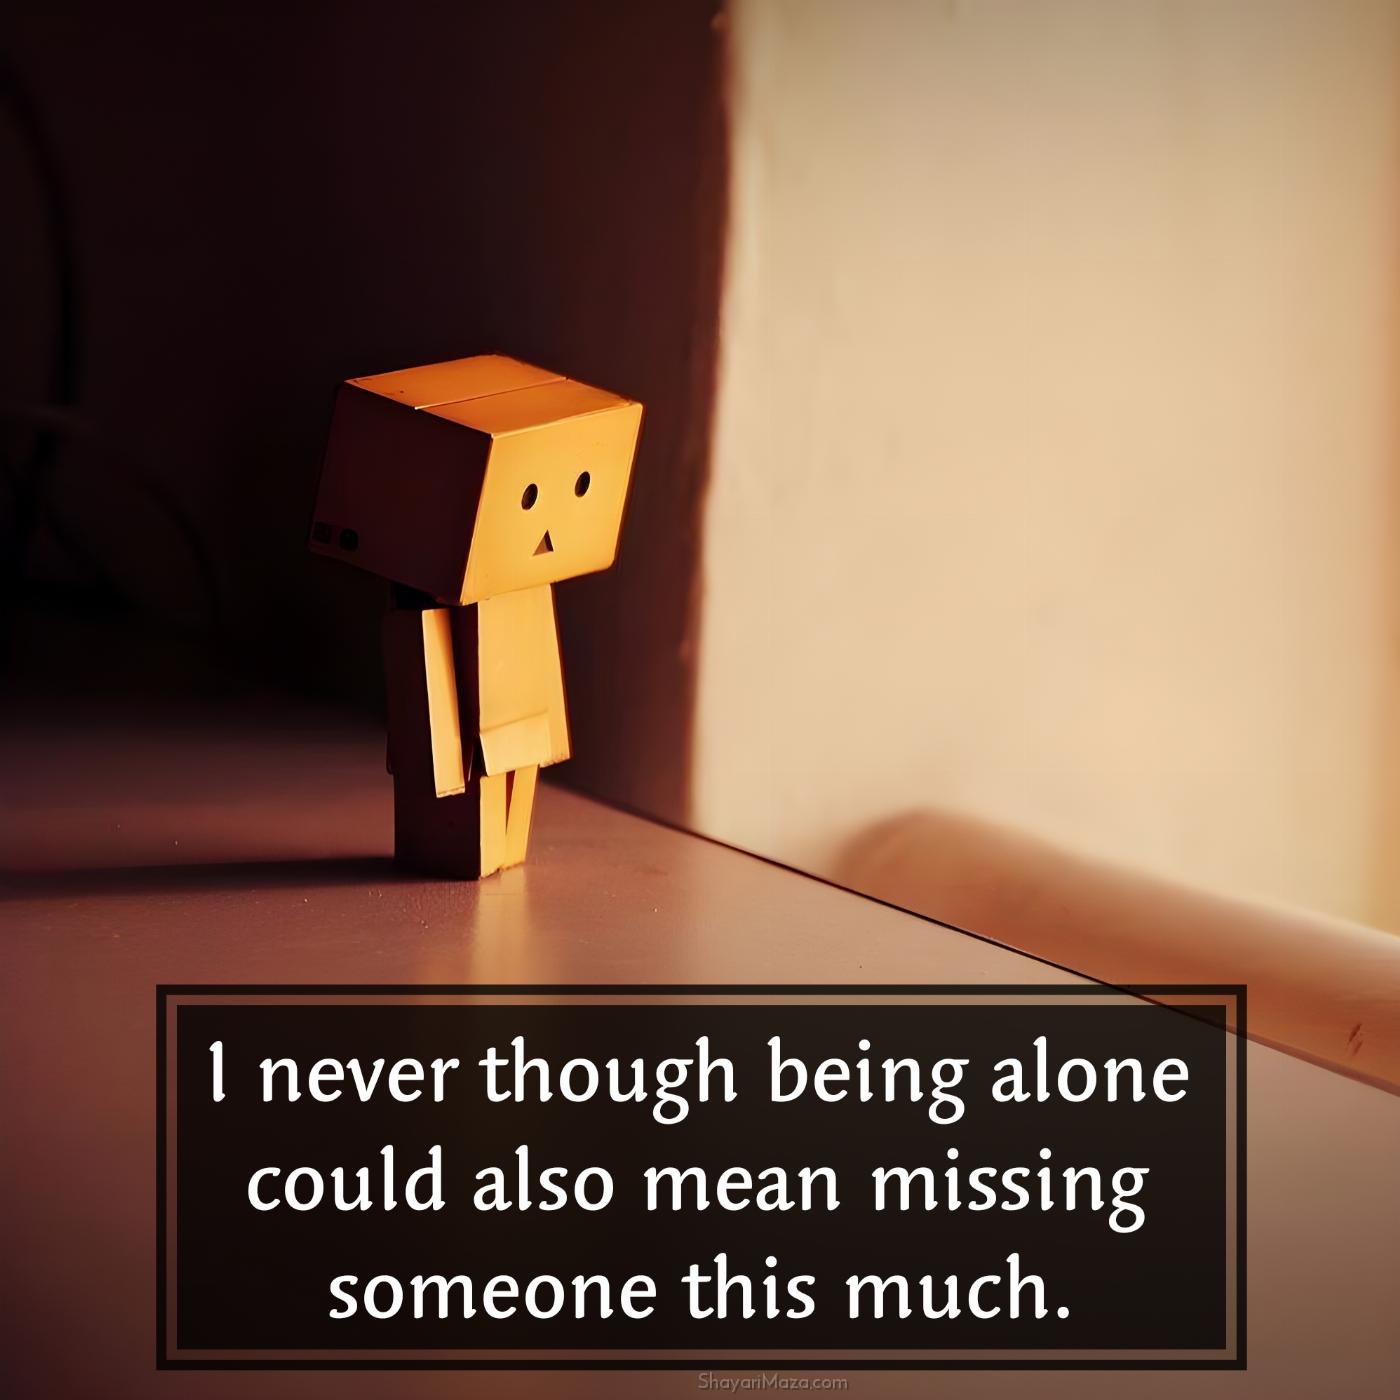 I never though being alone could also mean missing someone